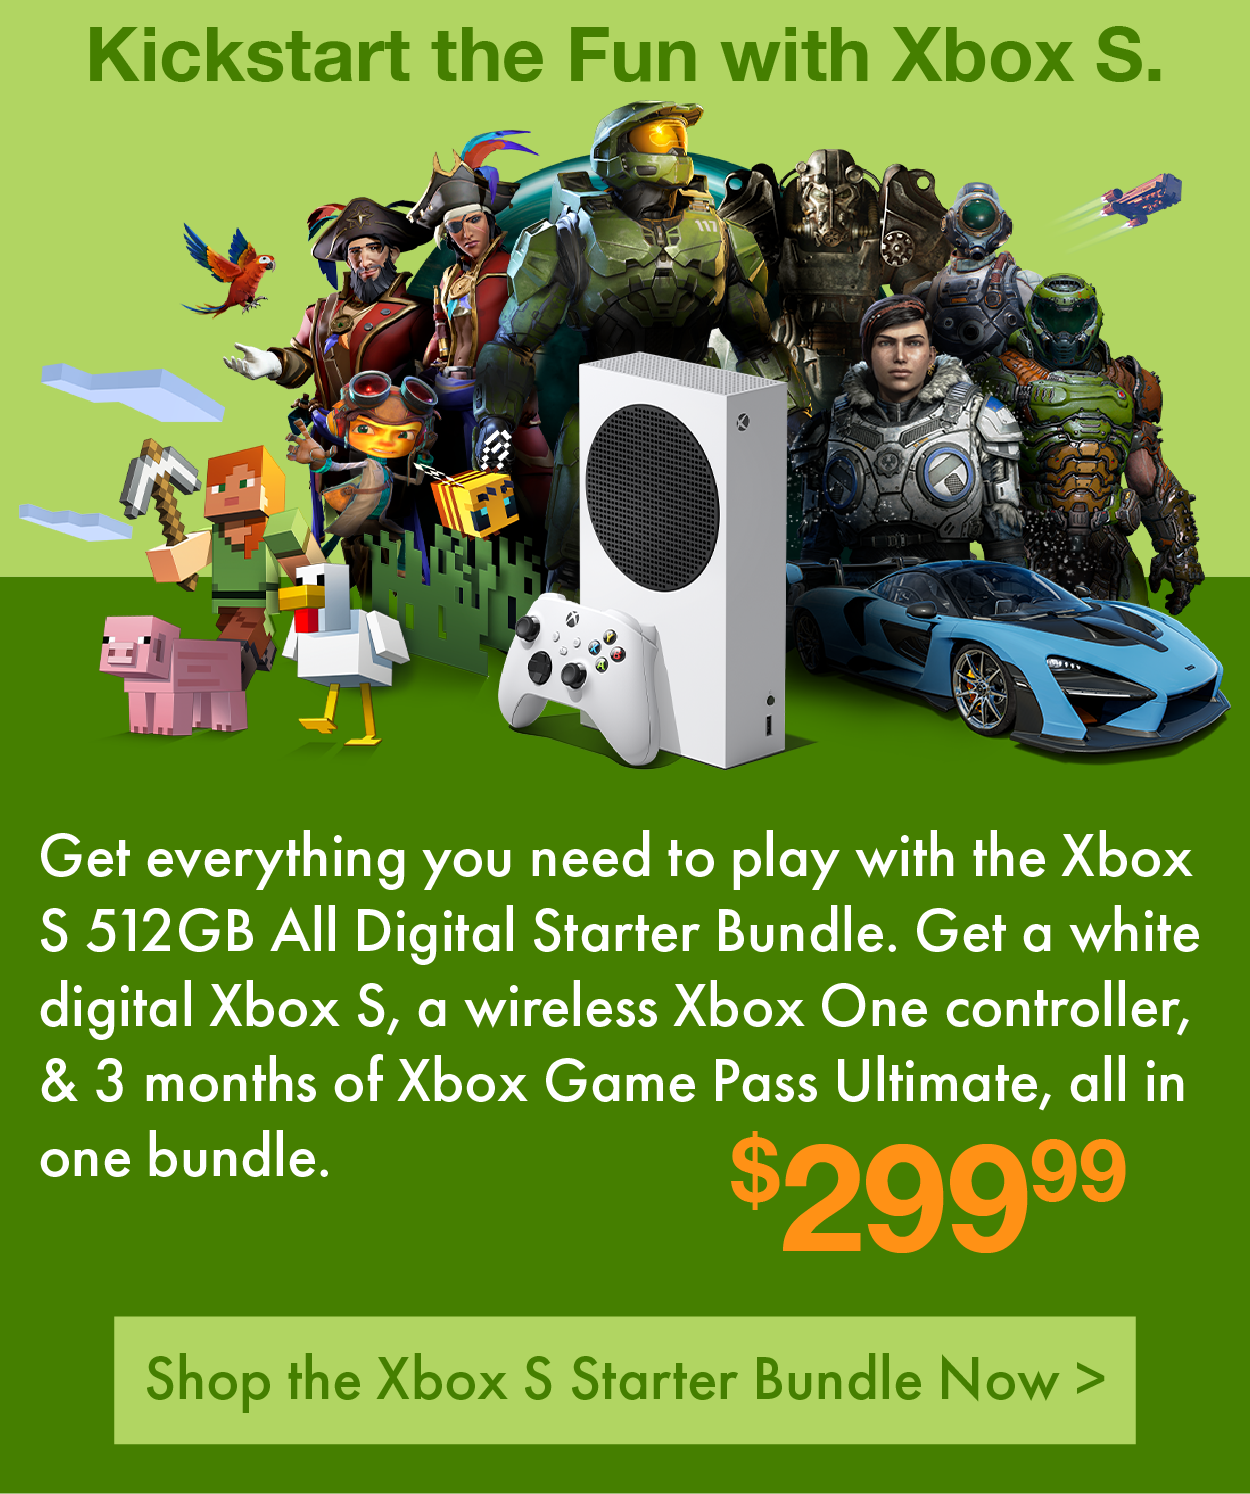 Kickstart the Fun with Xbox S. Get everything you need to play with the Xbox S 512GB All Digital Starter Bundle. Get a white digital Xbox S, a wireless Xbox One controller, & 3 months of Xbox Game Pass Ultimate, all in one bundle. Only $299.99